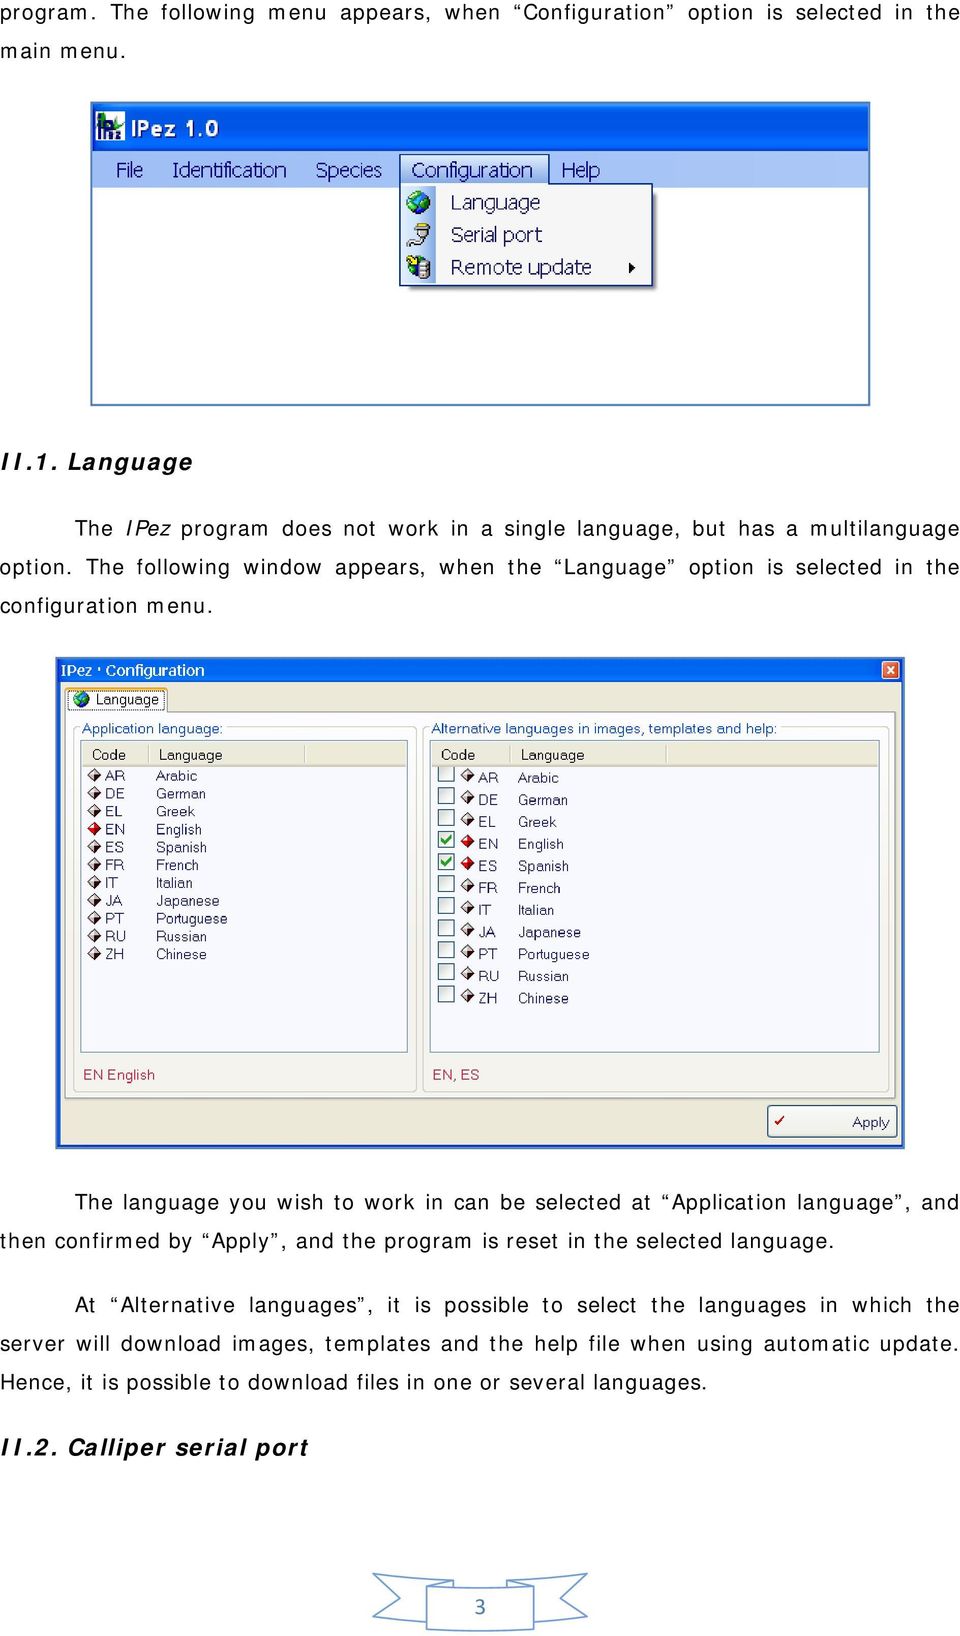 The following window appears, when the Language option is selected in the configuration menu.